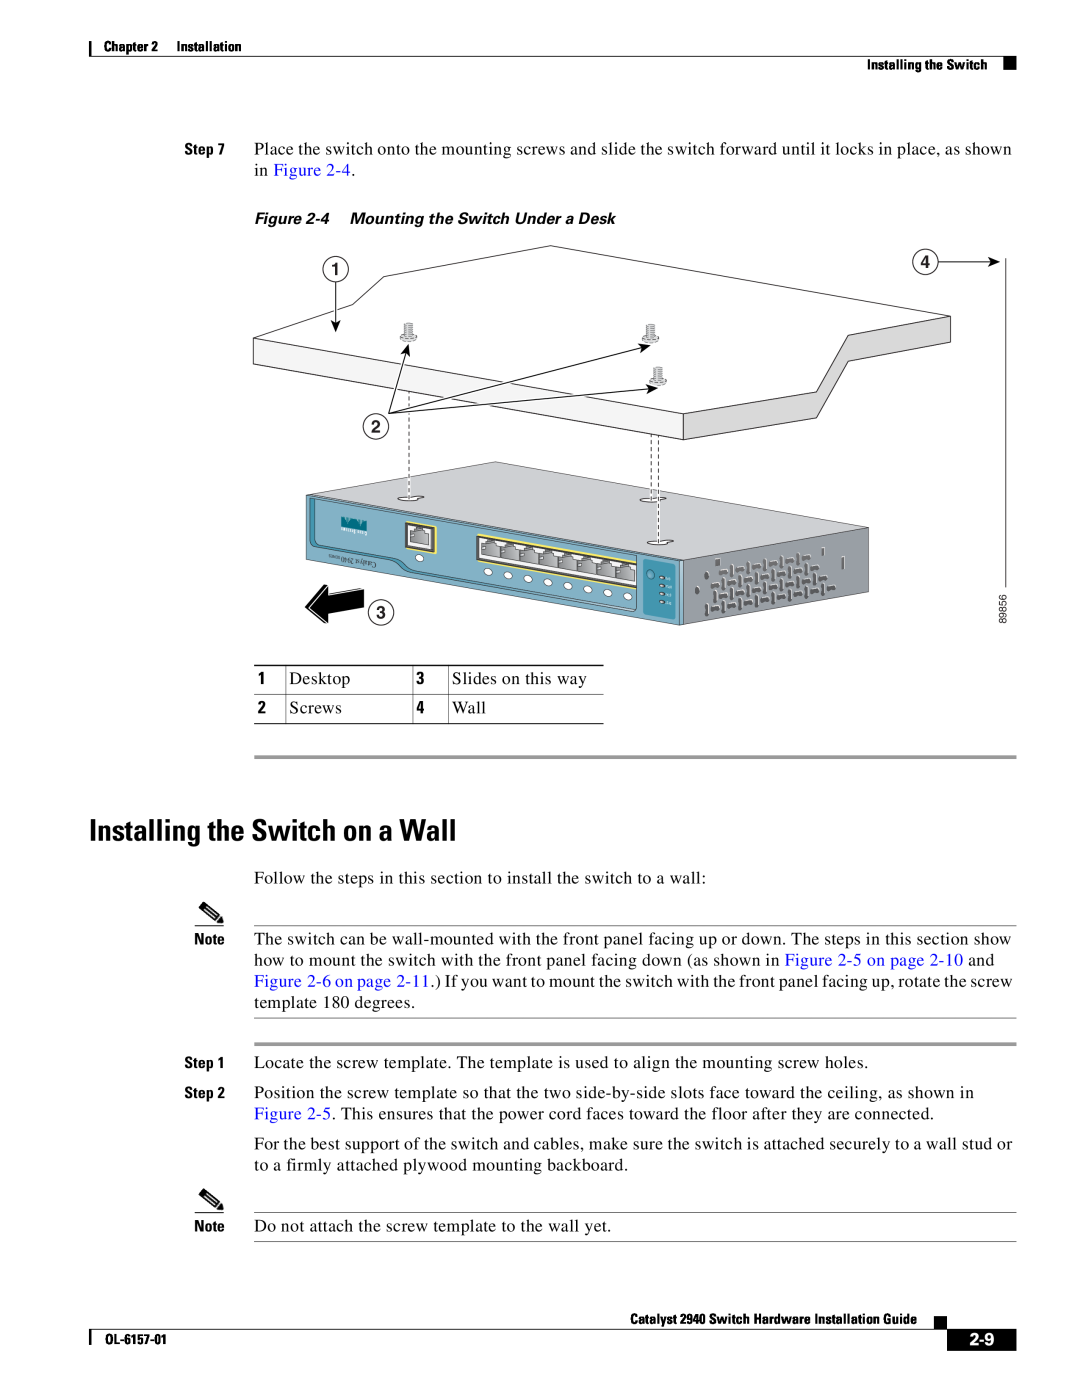 Cisco Systems OL-6157-01 manual Installing the Switch on a Wall, Desktop, Slides on this way, Screws 